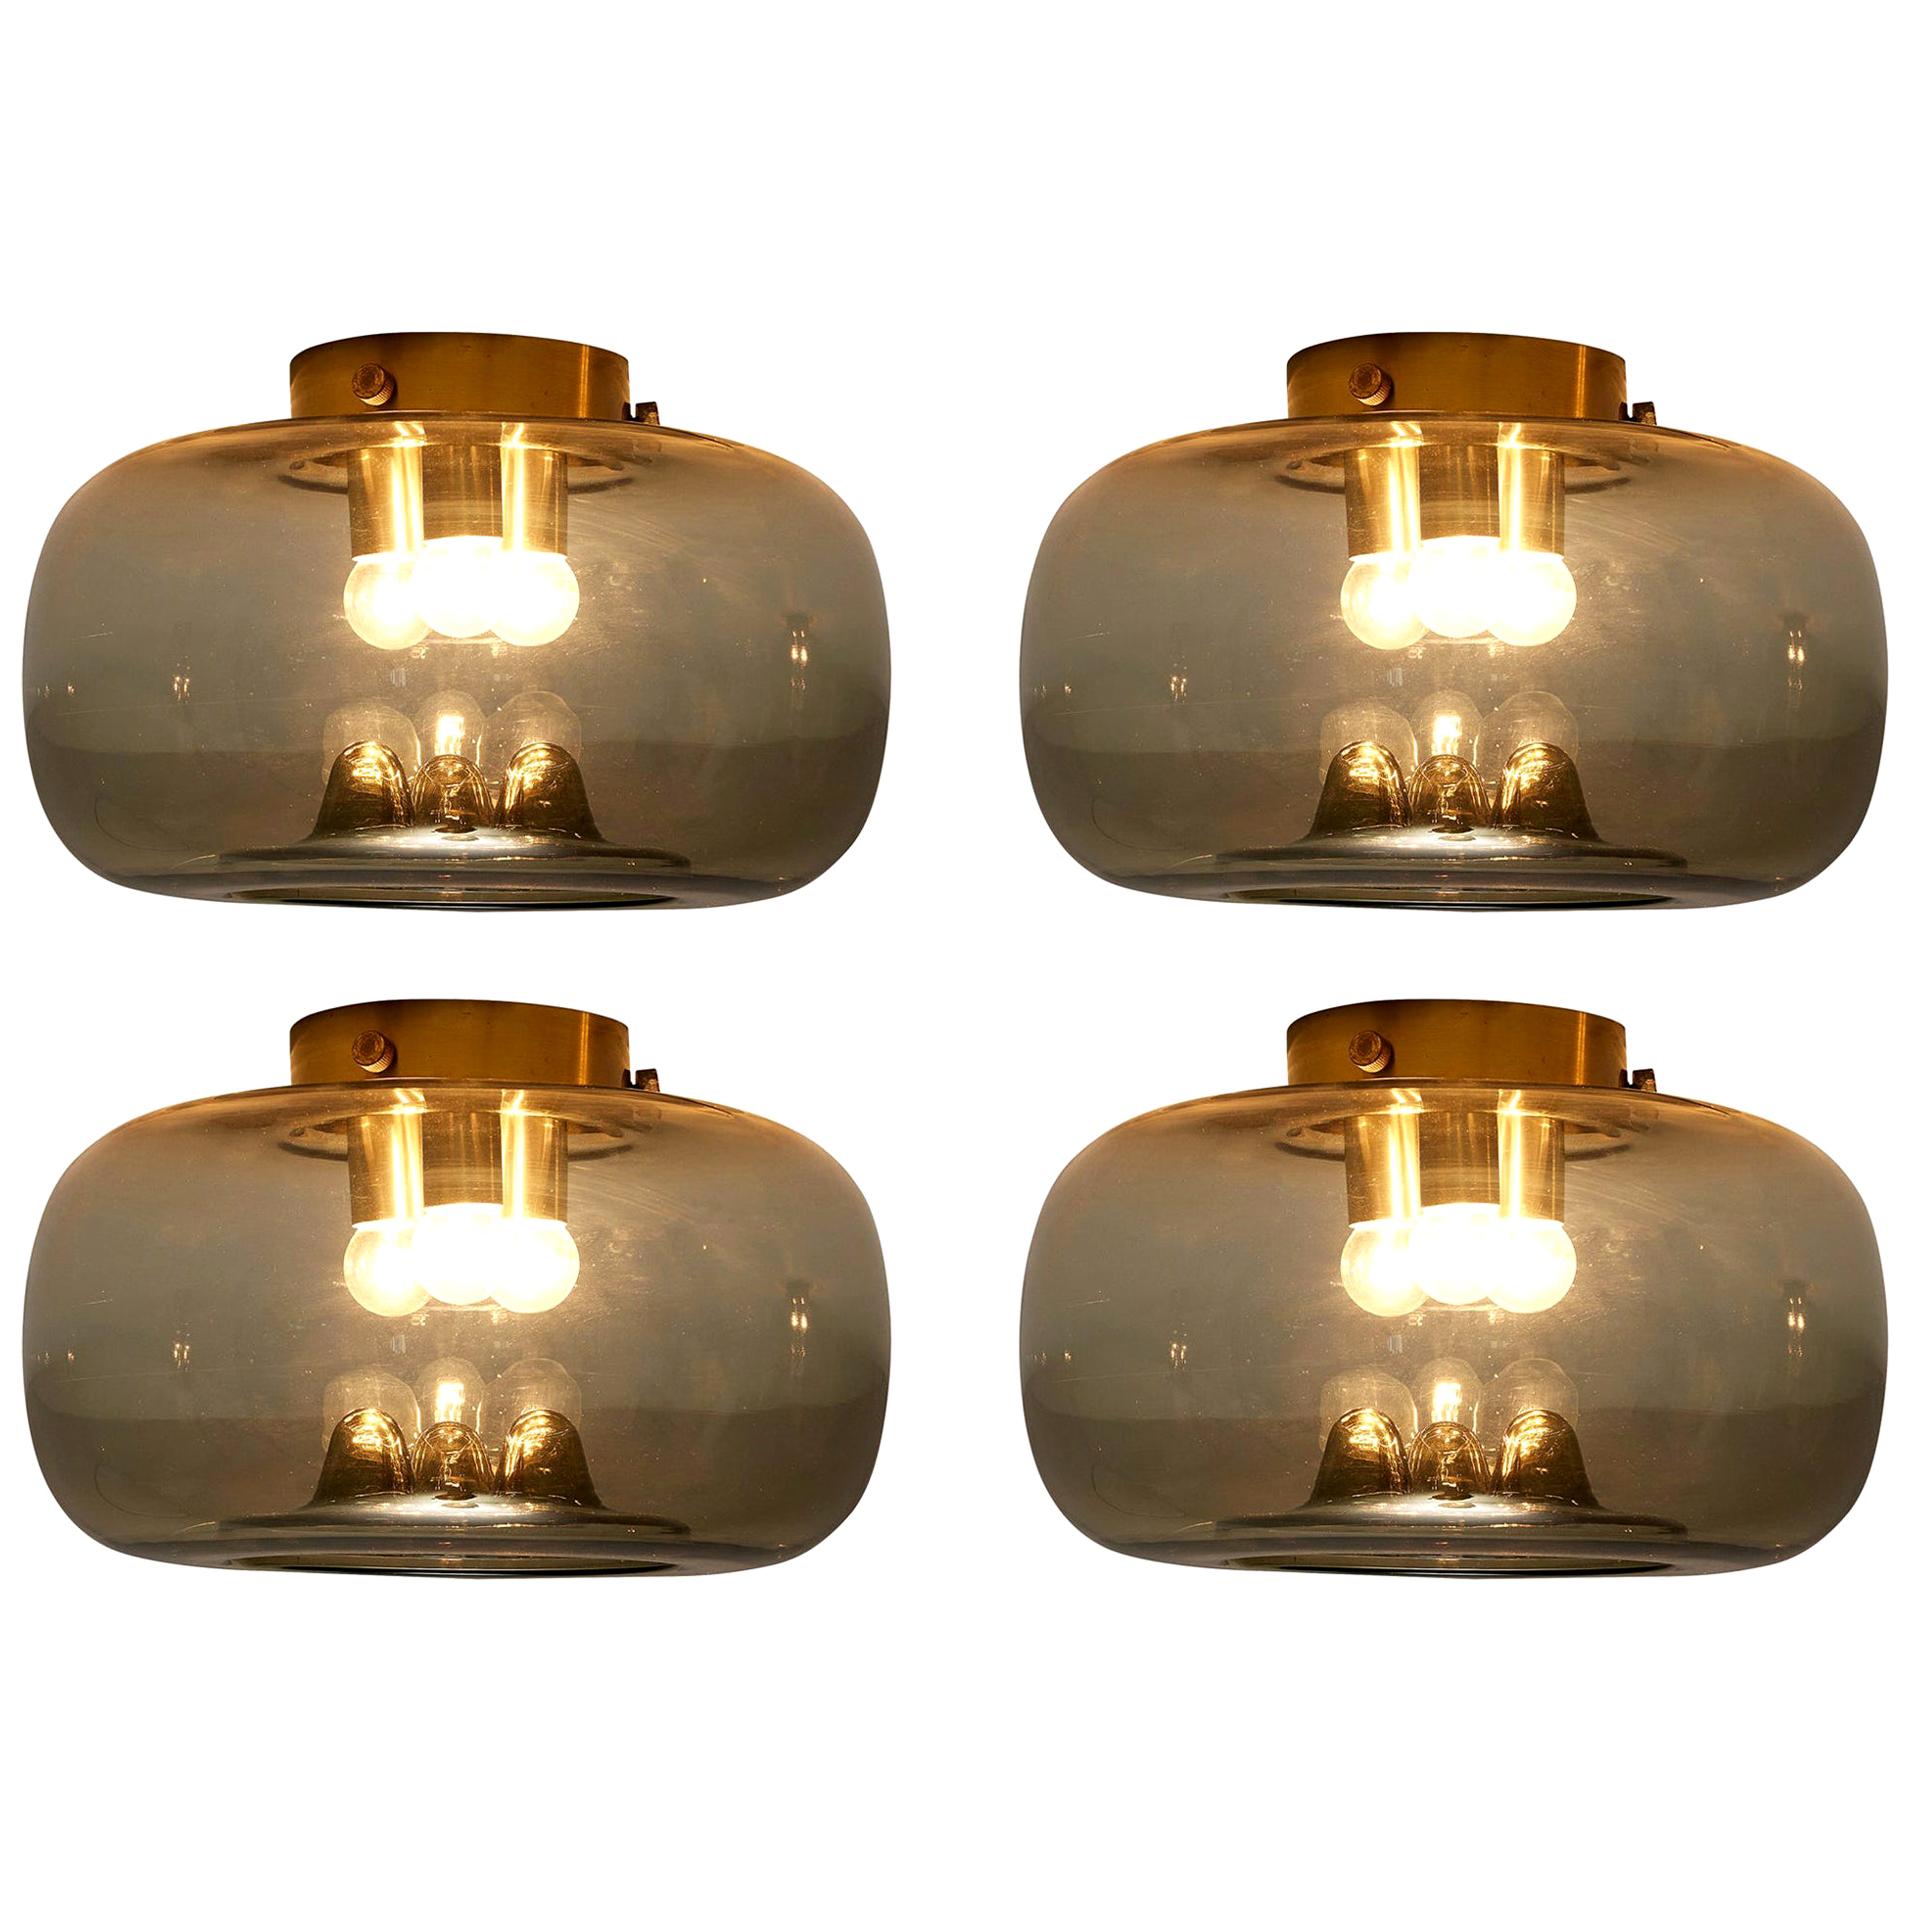 RAAK Amsterdam Four Ceiling Lights in Smoked Glass and Brass